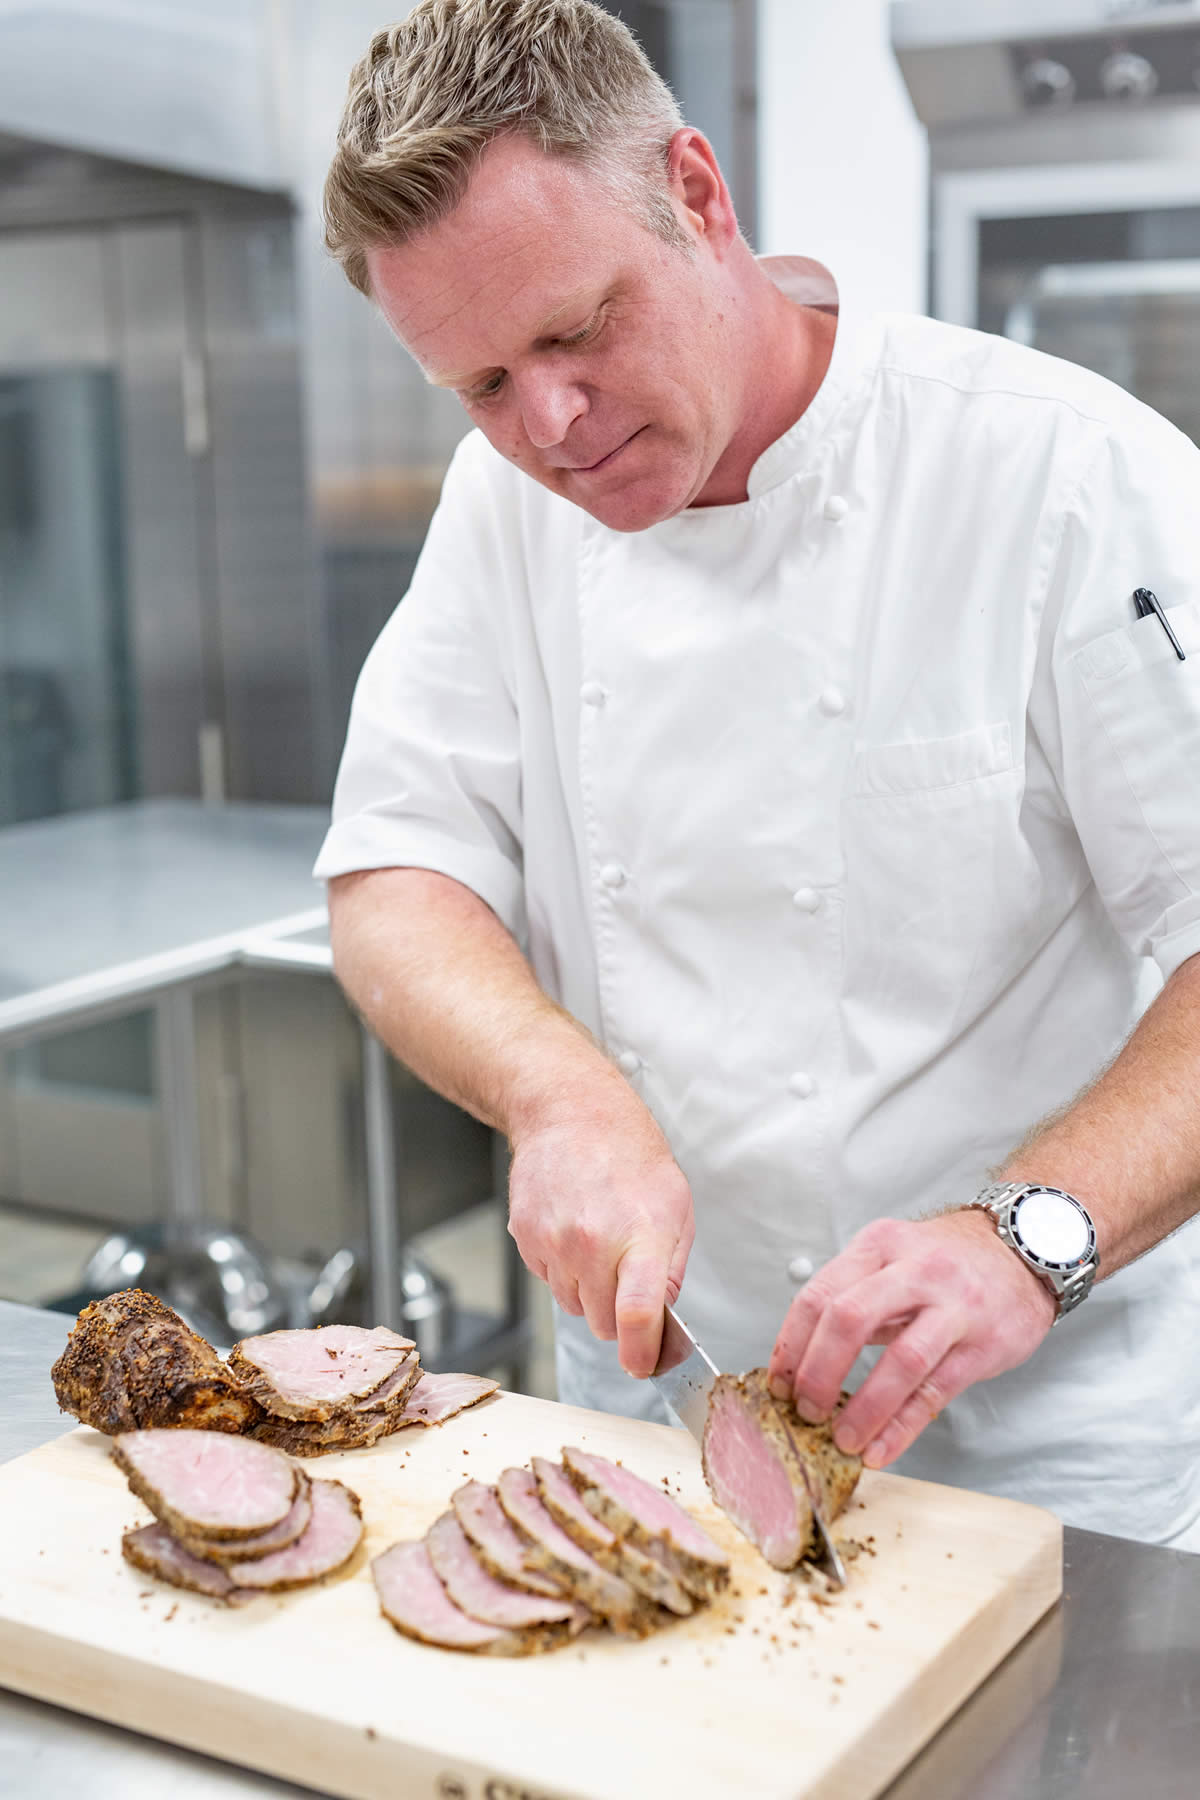 Chef Balster slicing a roast on a wooden cutting board.